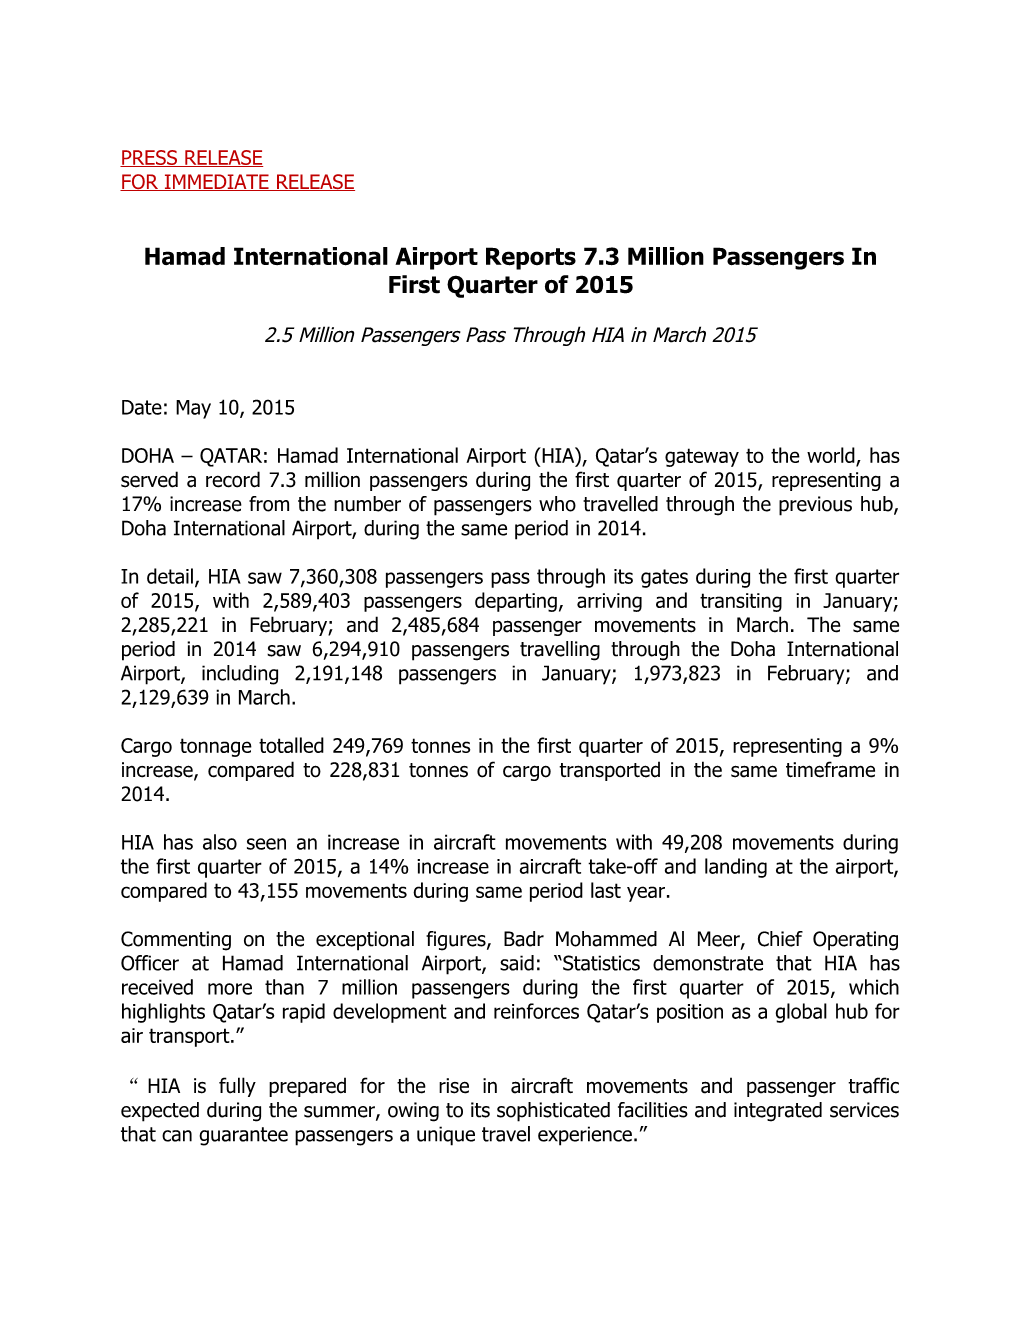 Hamad International Airport Reports 7.3 Million Passengers in First Quarter of 2015